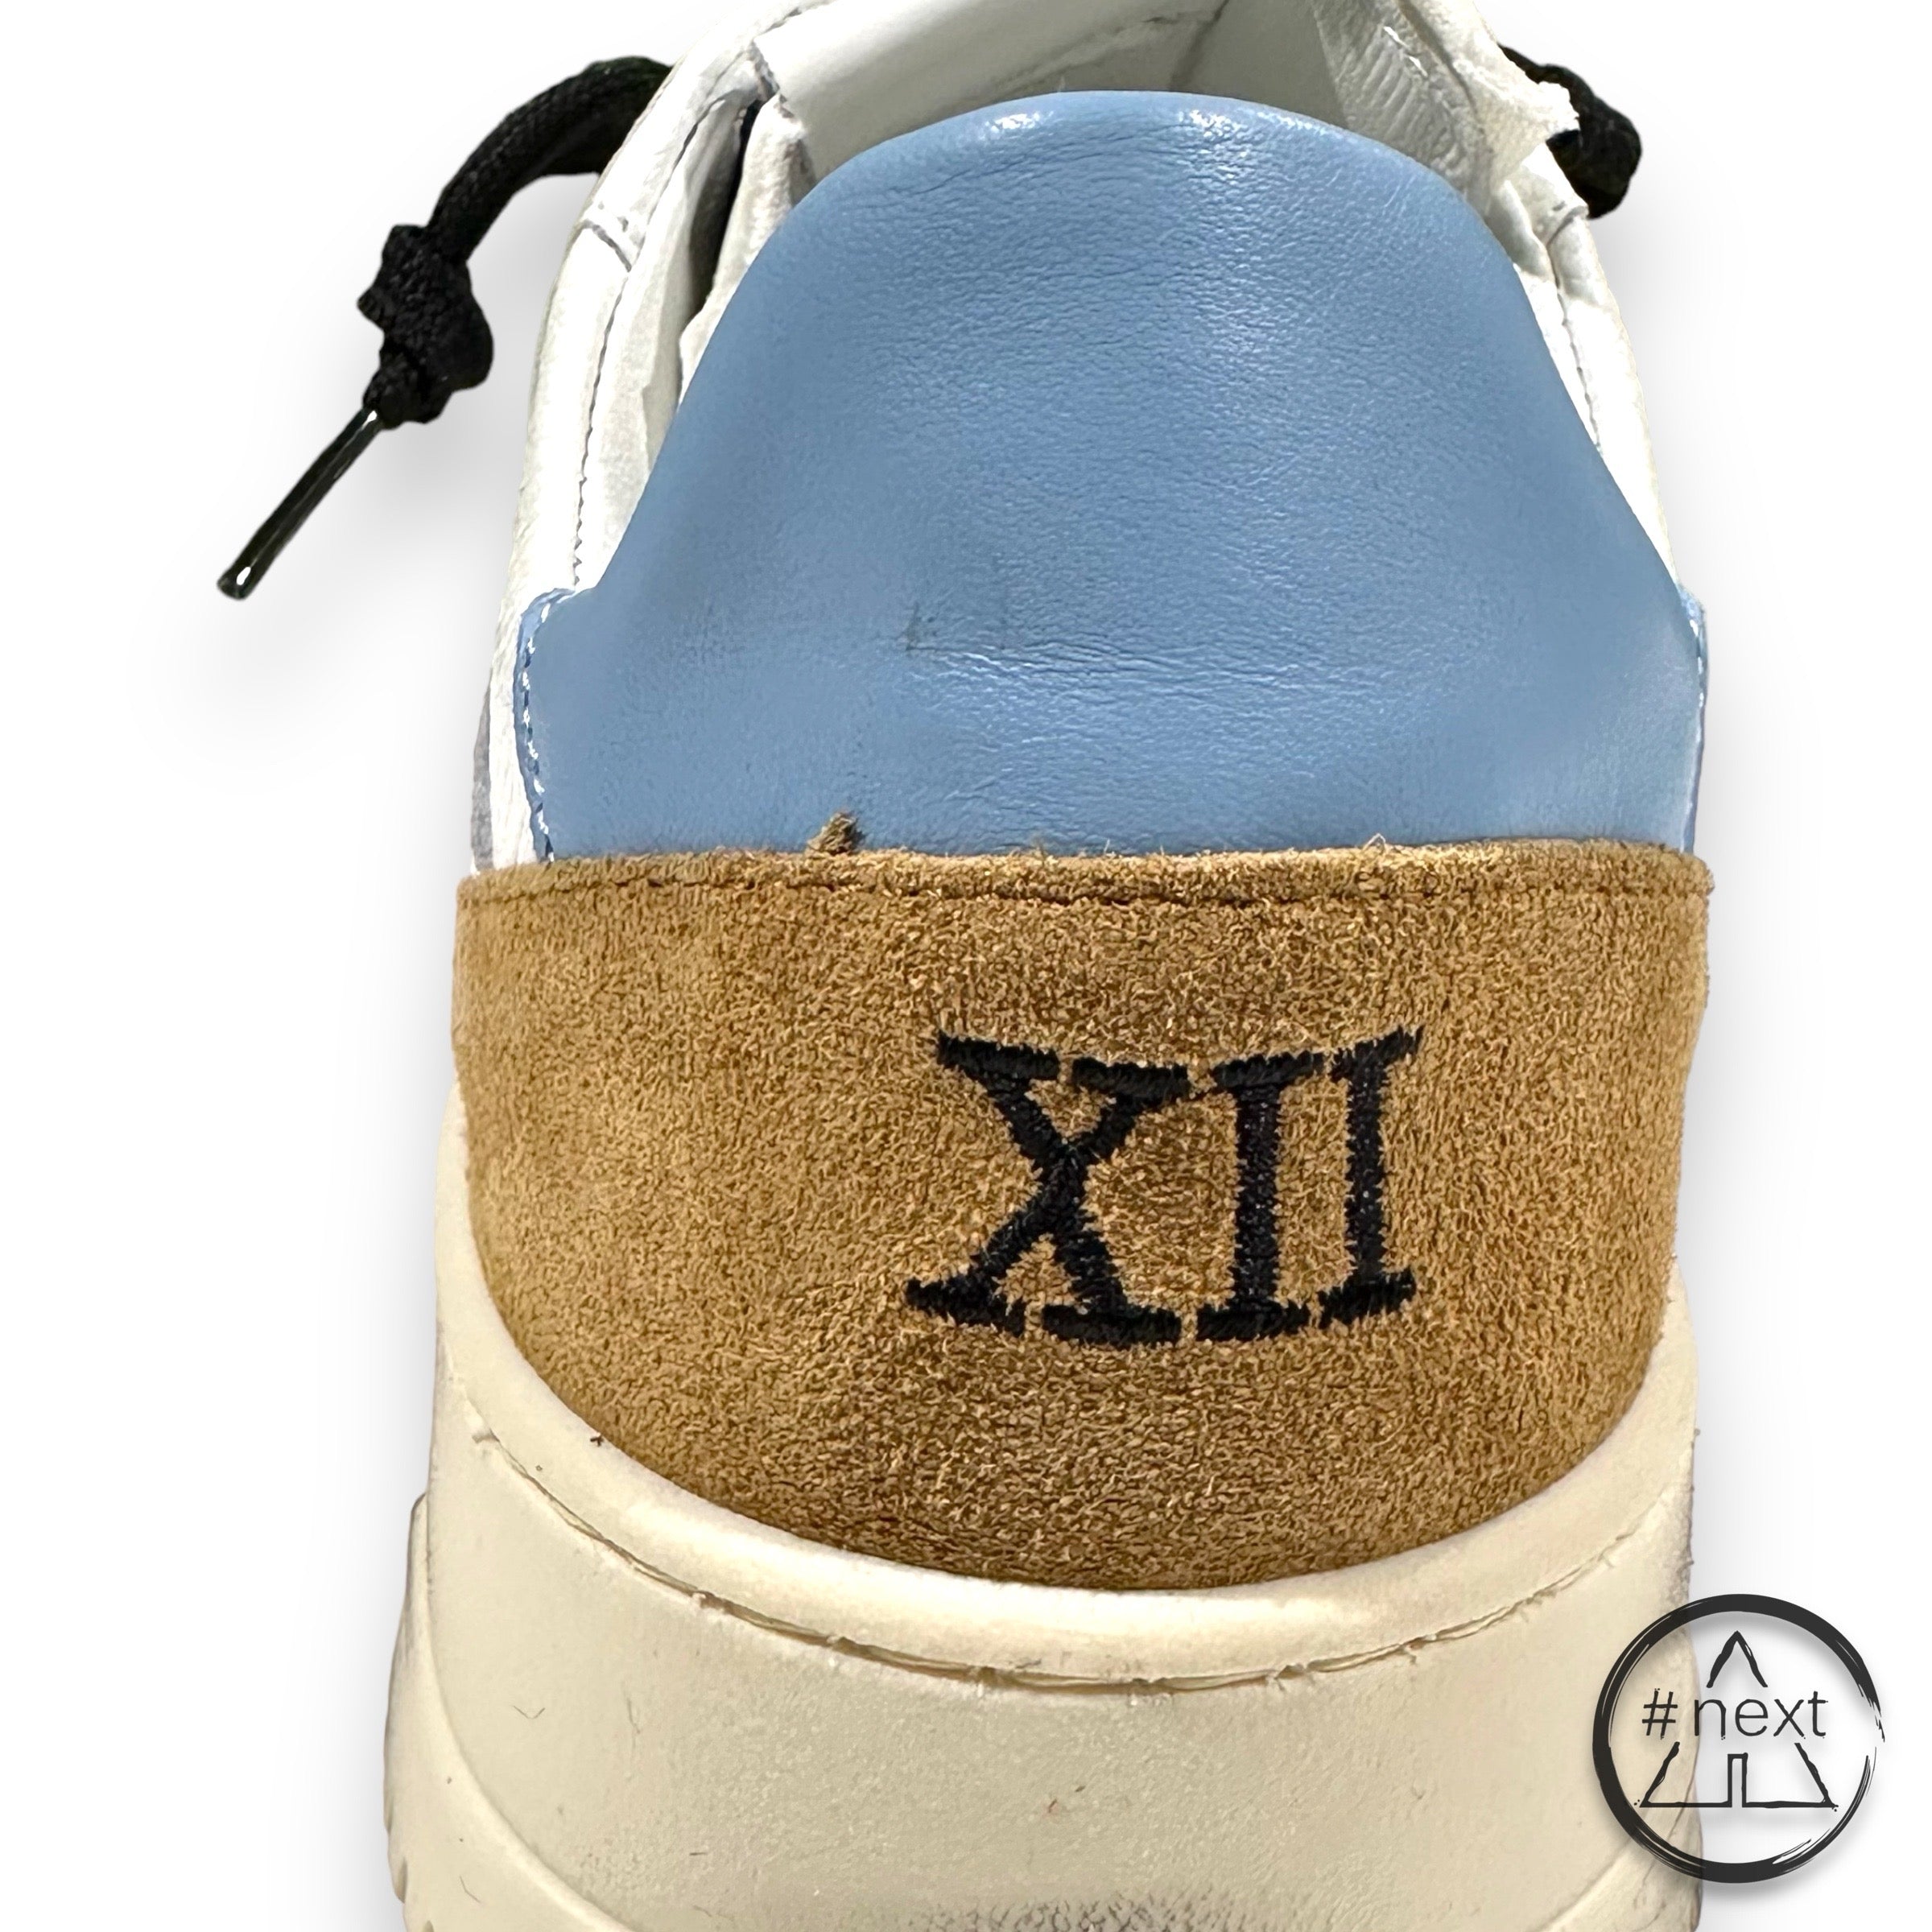 (#A) TWELVE - Sneakers URBAN - Bianco, taupe, azzurro. - ANDY #NEXT